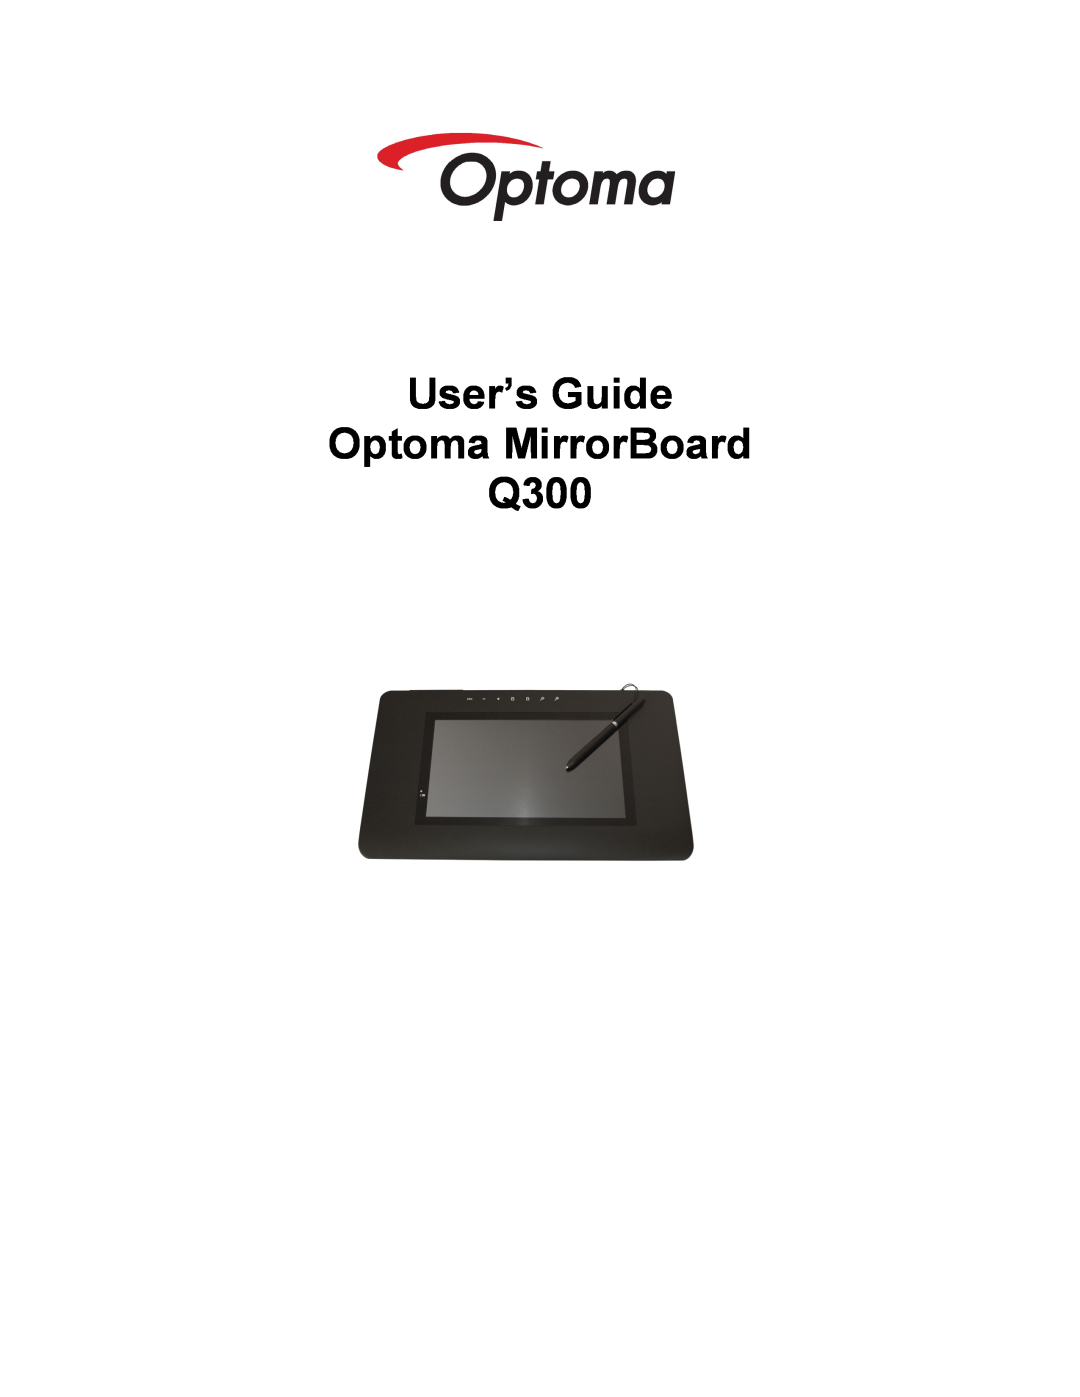 Optoma Technology manual User’s Guide Optoma MirrorBoard Q300 